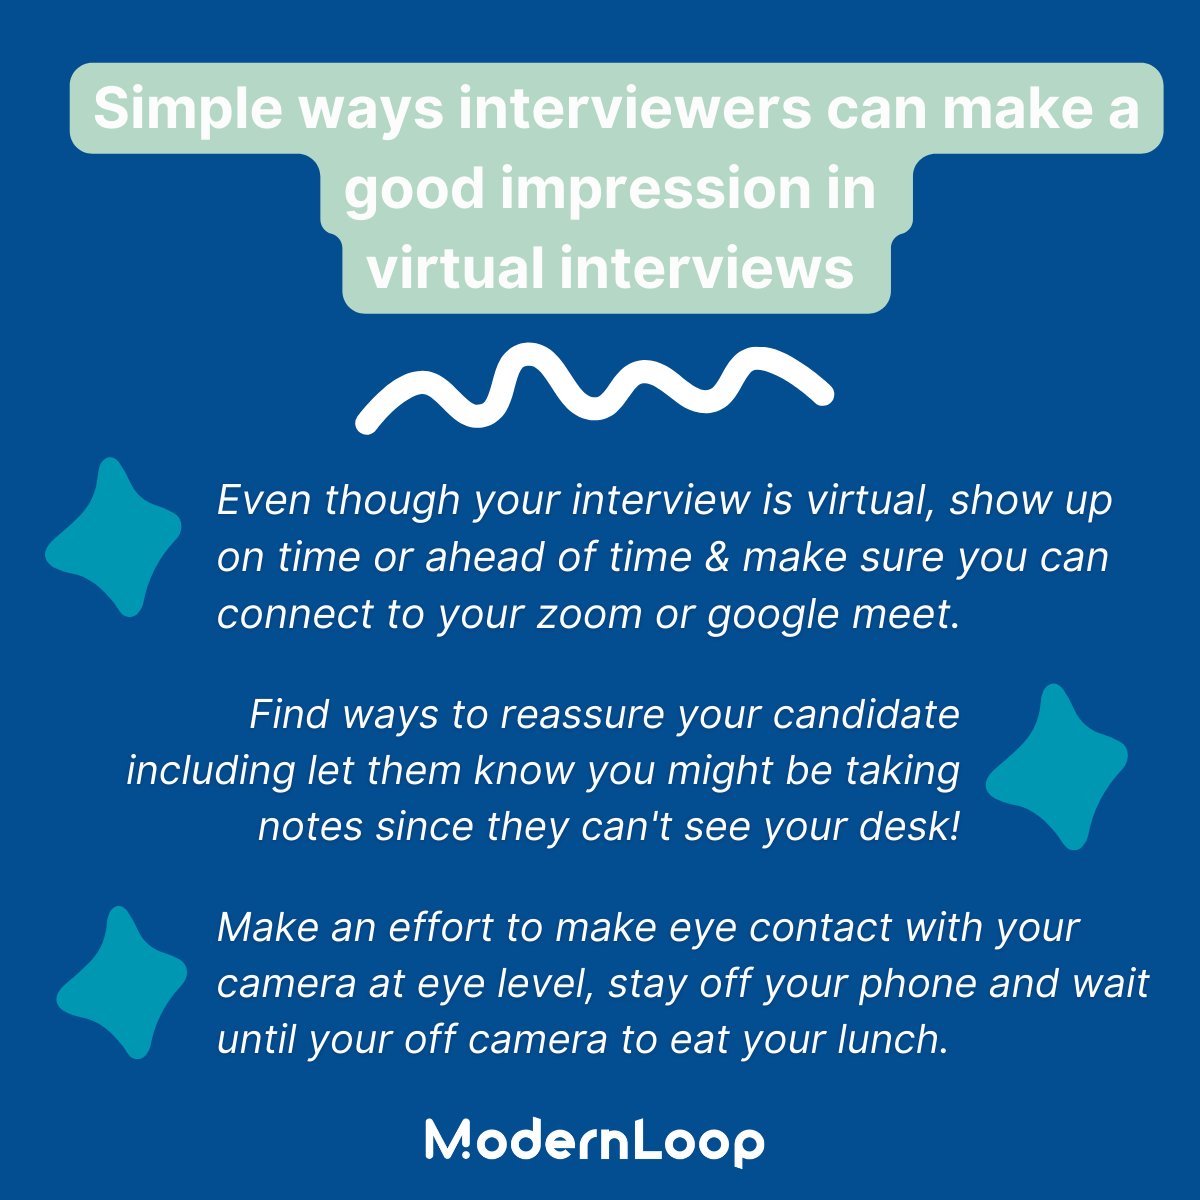 Some things can only be learned by doing…

& The easiest way to teach best practices for #virtualinterviews
is through shadowing and reverse shadowing!

Check out how our interview training automation helps instill interview etiquette in your team.

👨‍💻 👩‍💻 bit.ly/3N37ktR